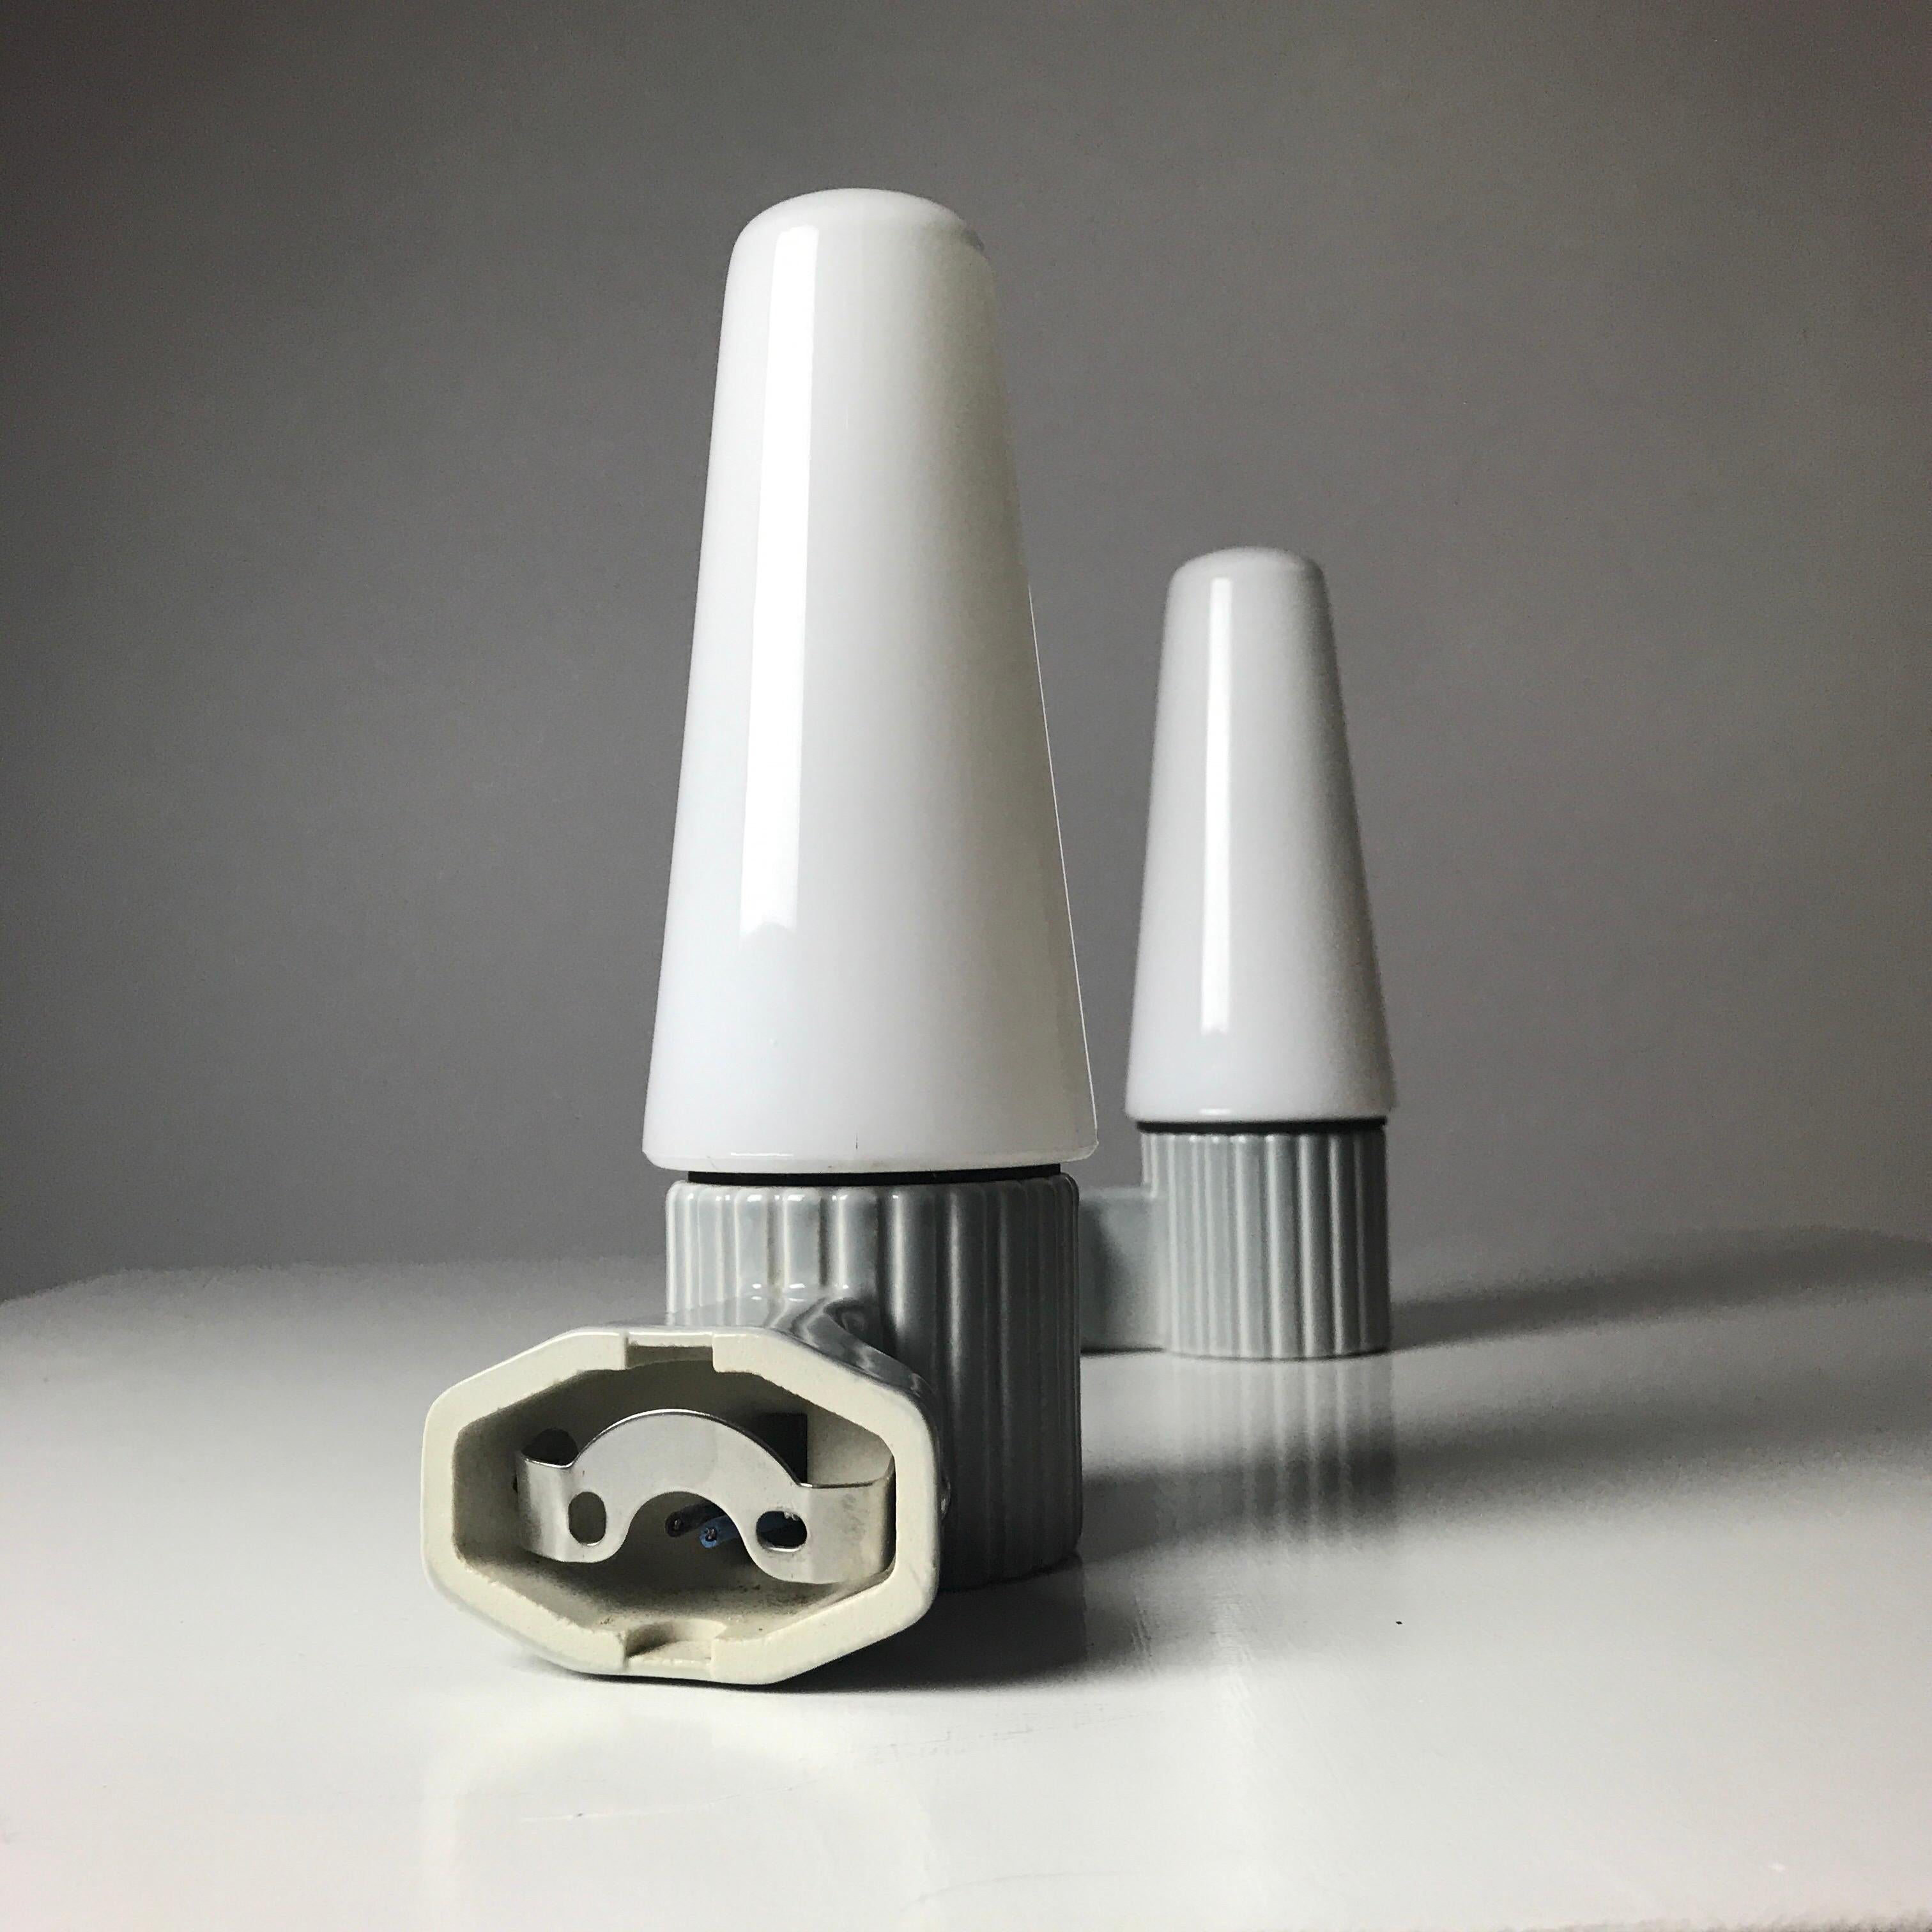 Soft mint gray glazed porcelain combined with cone shaped milky white opaline glass is just a beautiful scandinavian midcentury design by Sigvard Bernadotte for IFÖ, Sweden 1960s. 

This set of two sconces has all the components, screws, wall